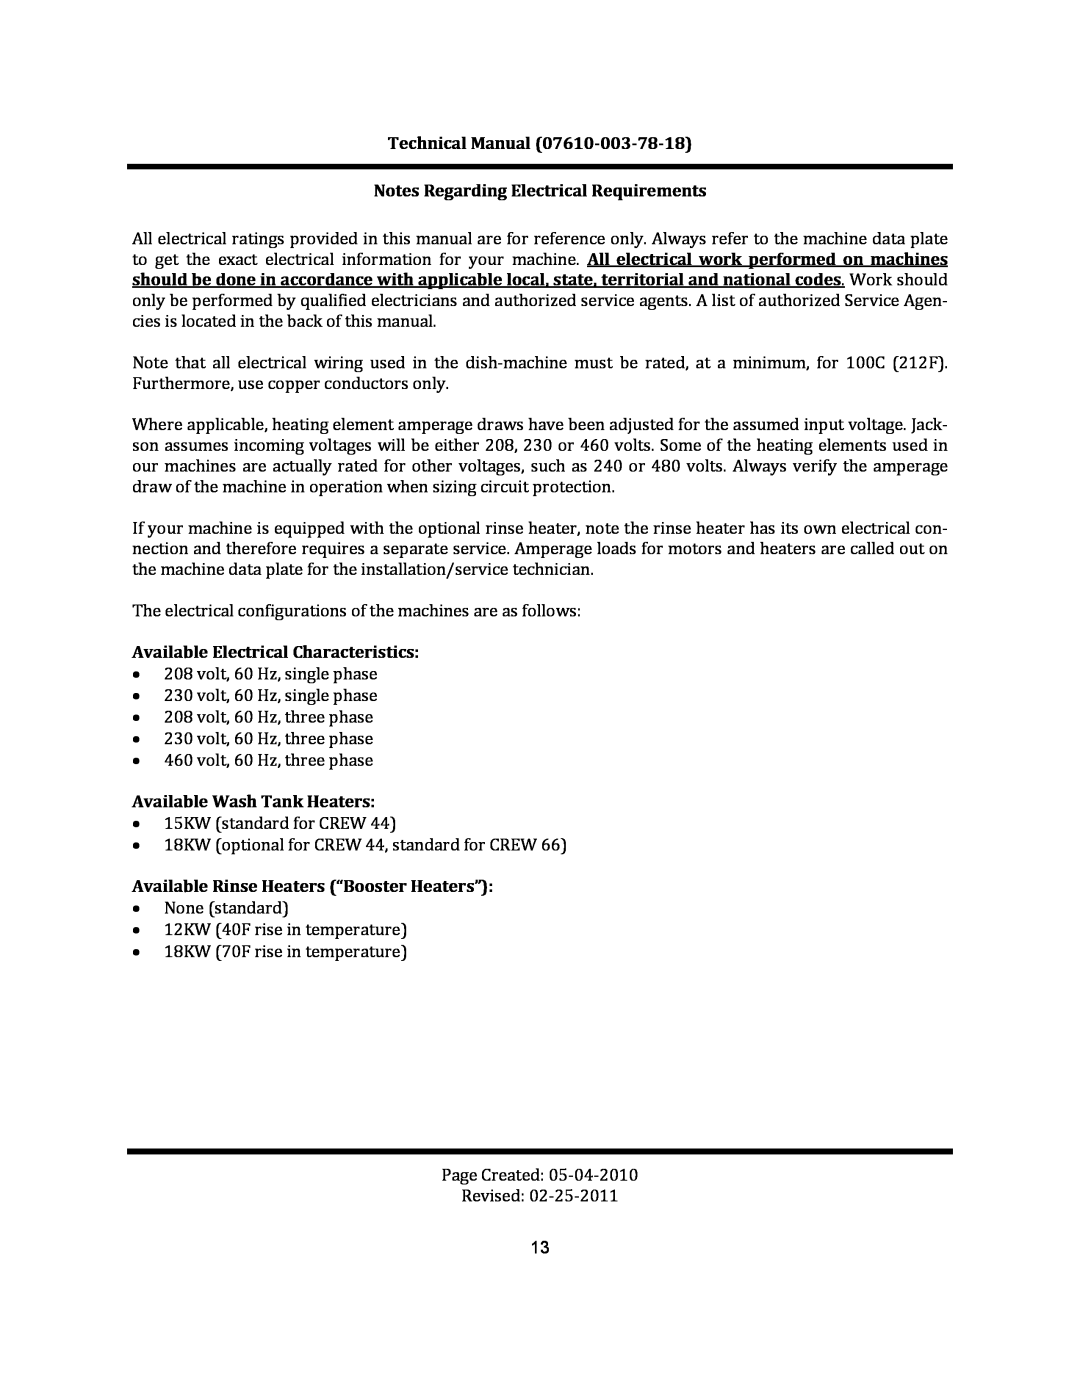 Jackson CREW 66 Technical Manual 07610‐003‐78‐18, Notes Regarding Electrical Requirements, Available Wash Tank Heaters 